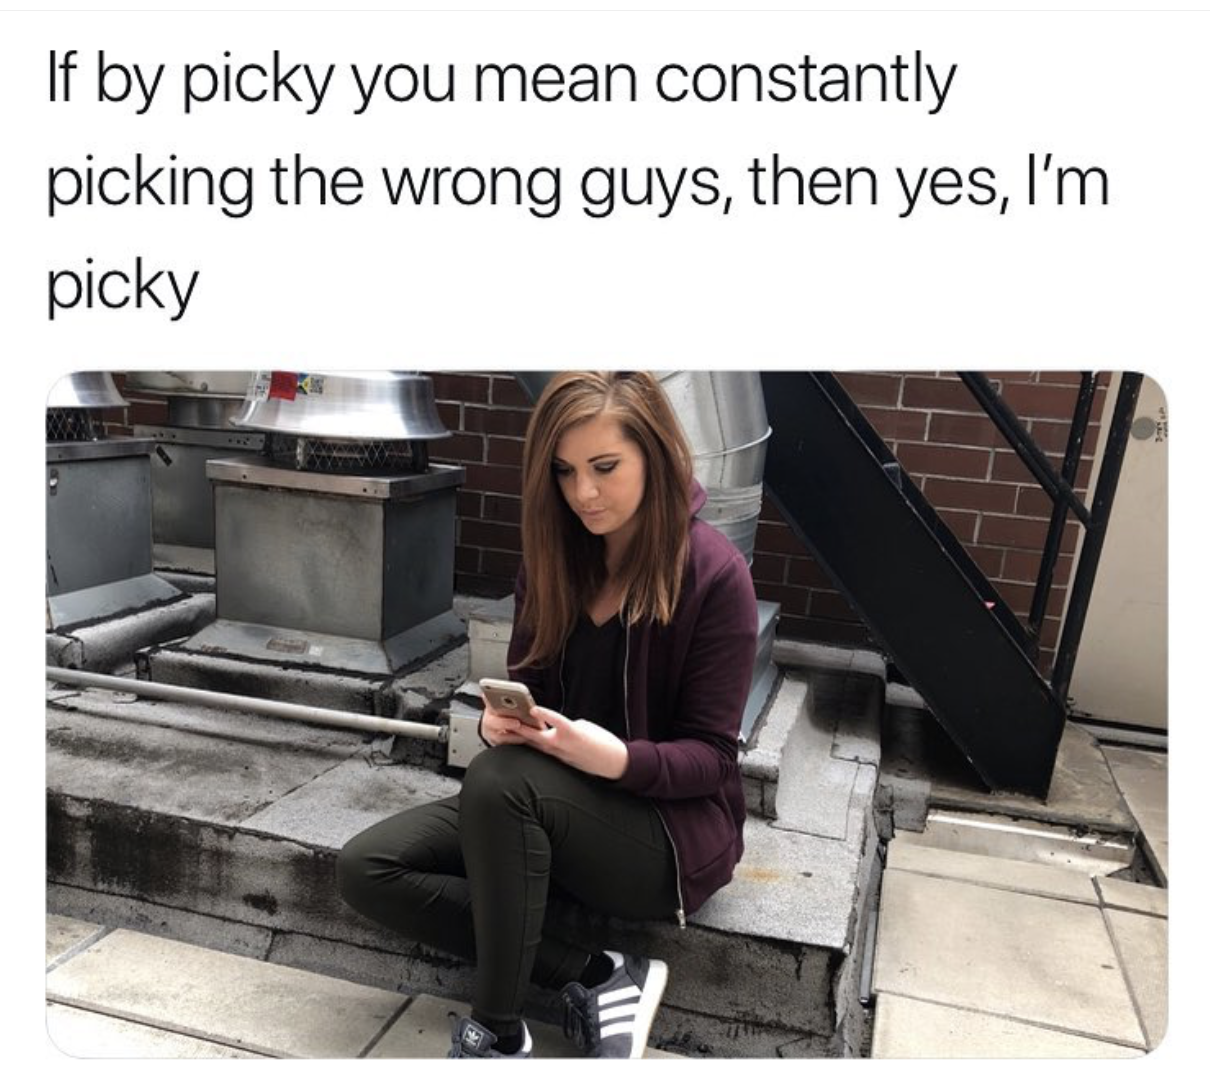 always pick the wrong guys meme - If by picky you mean constantly picking the wrong guys, then yes, I'm picky